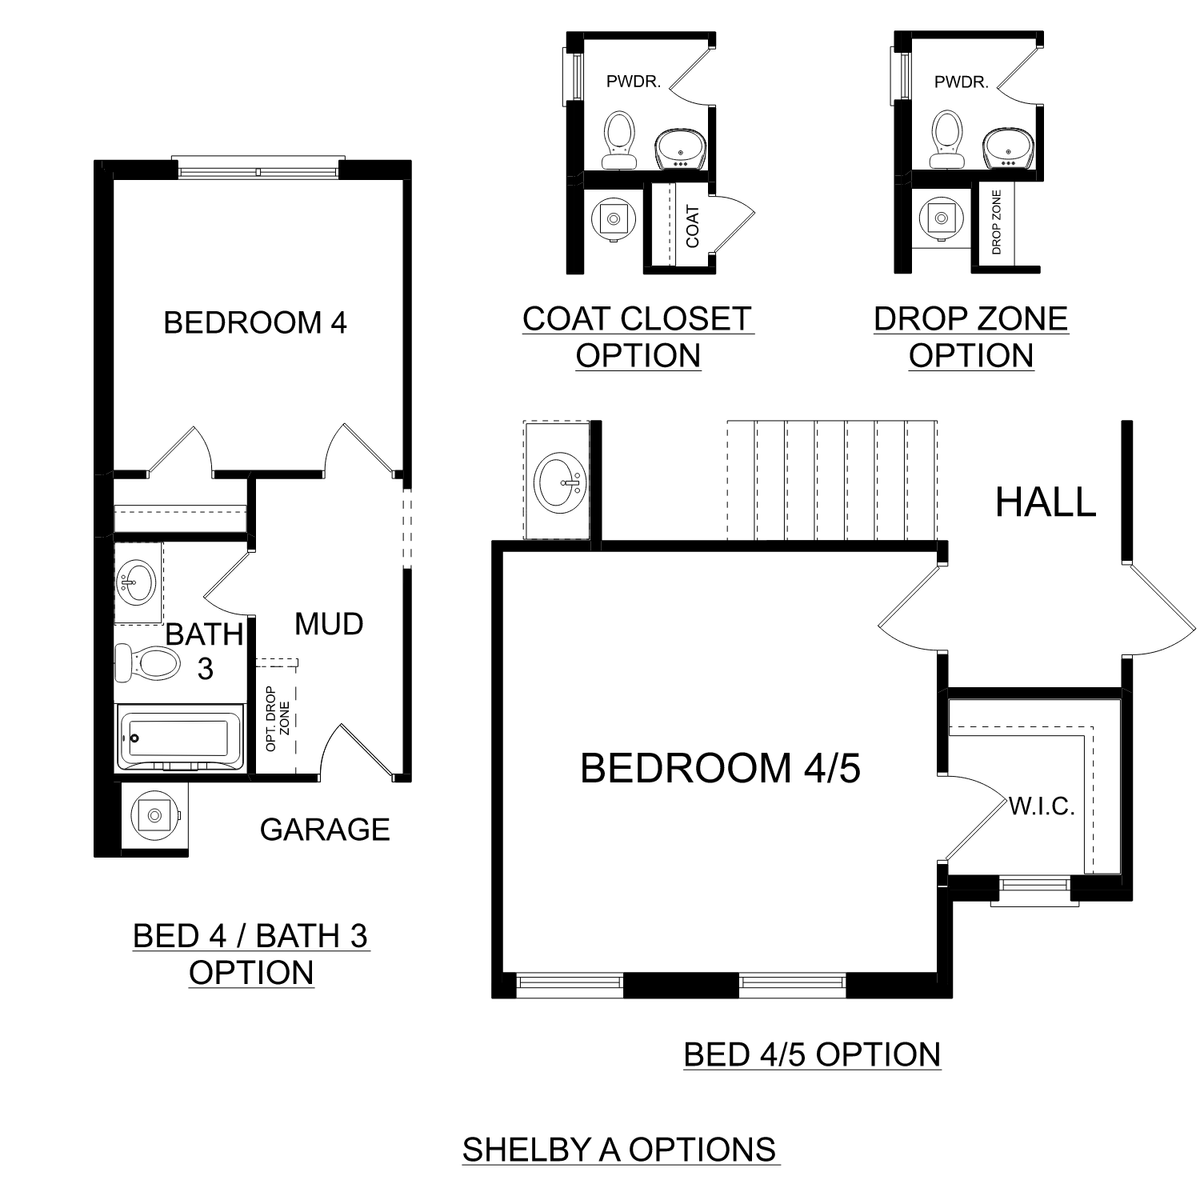 3 - The Shelby A buildable floor plan layout in Davidson Homes' The Reserve at North Ridge community.